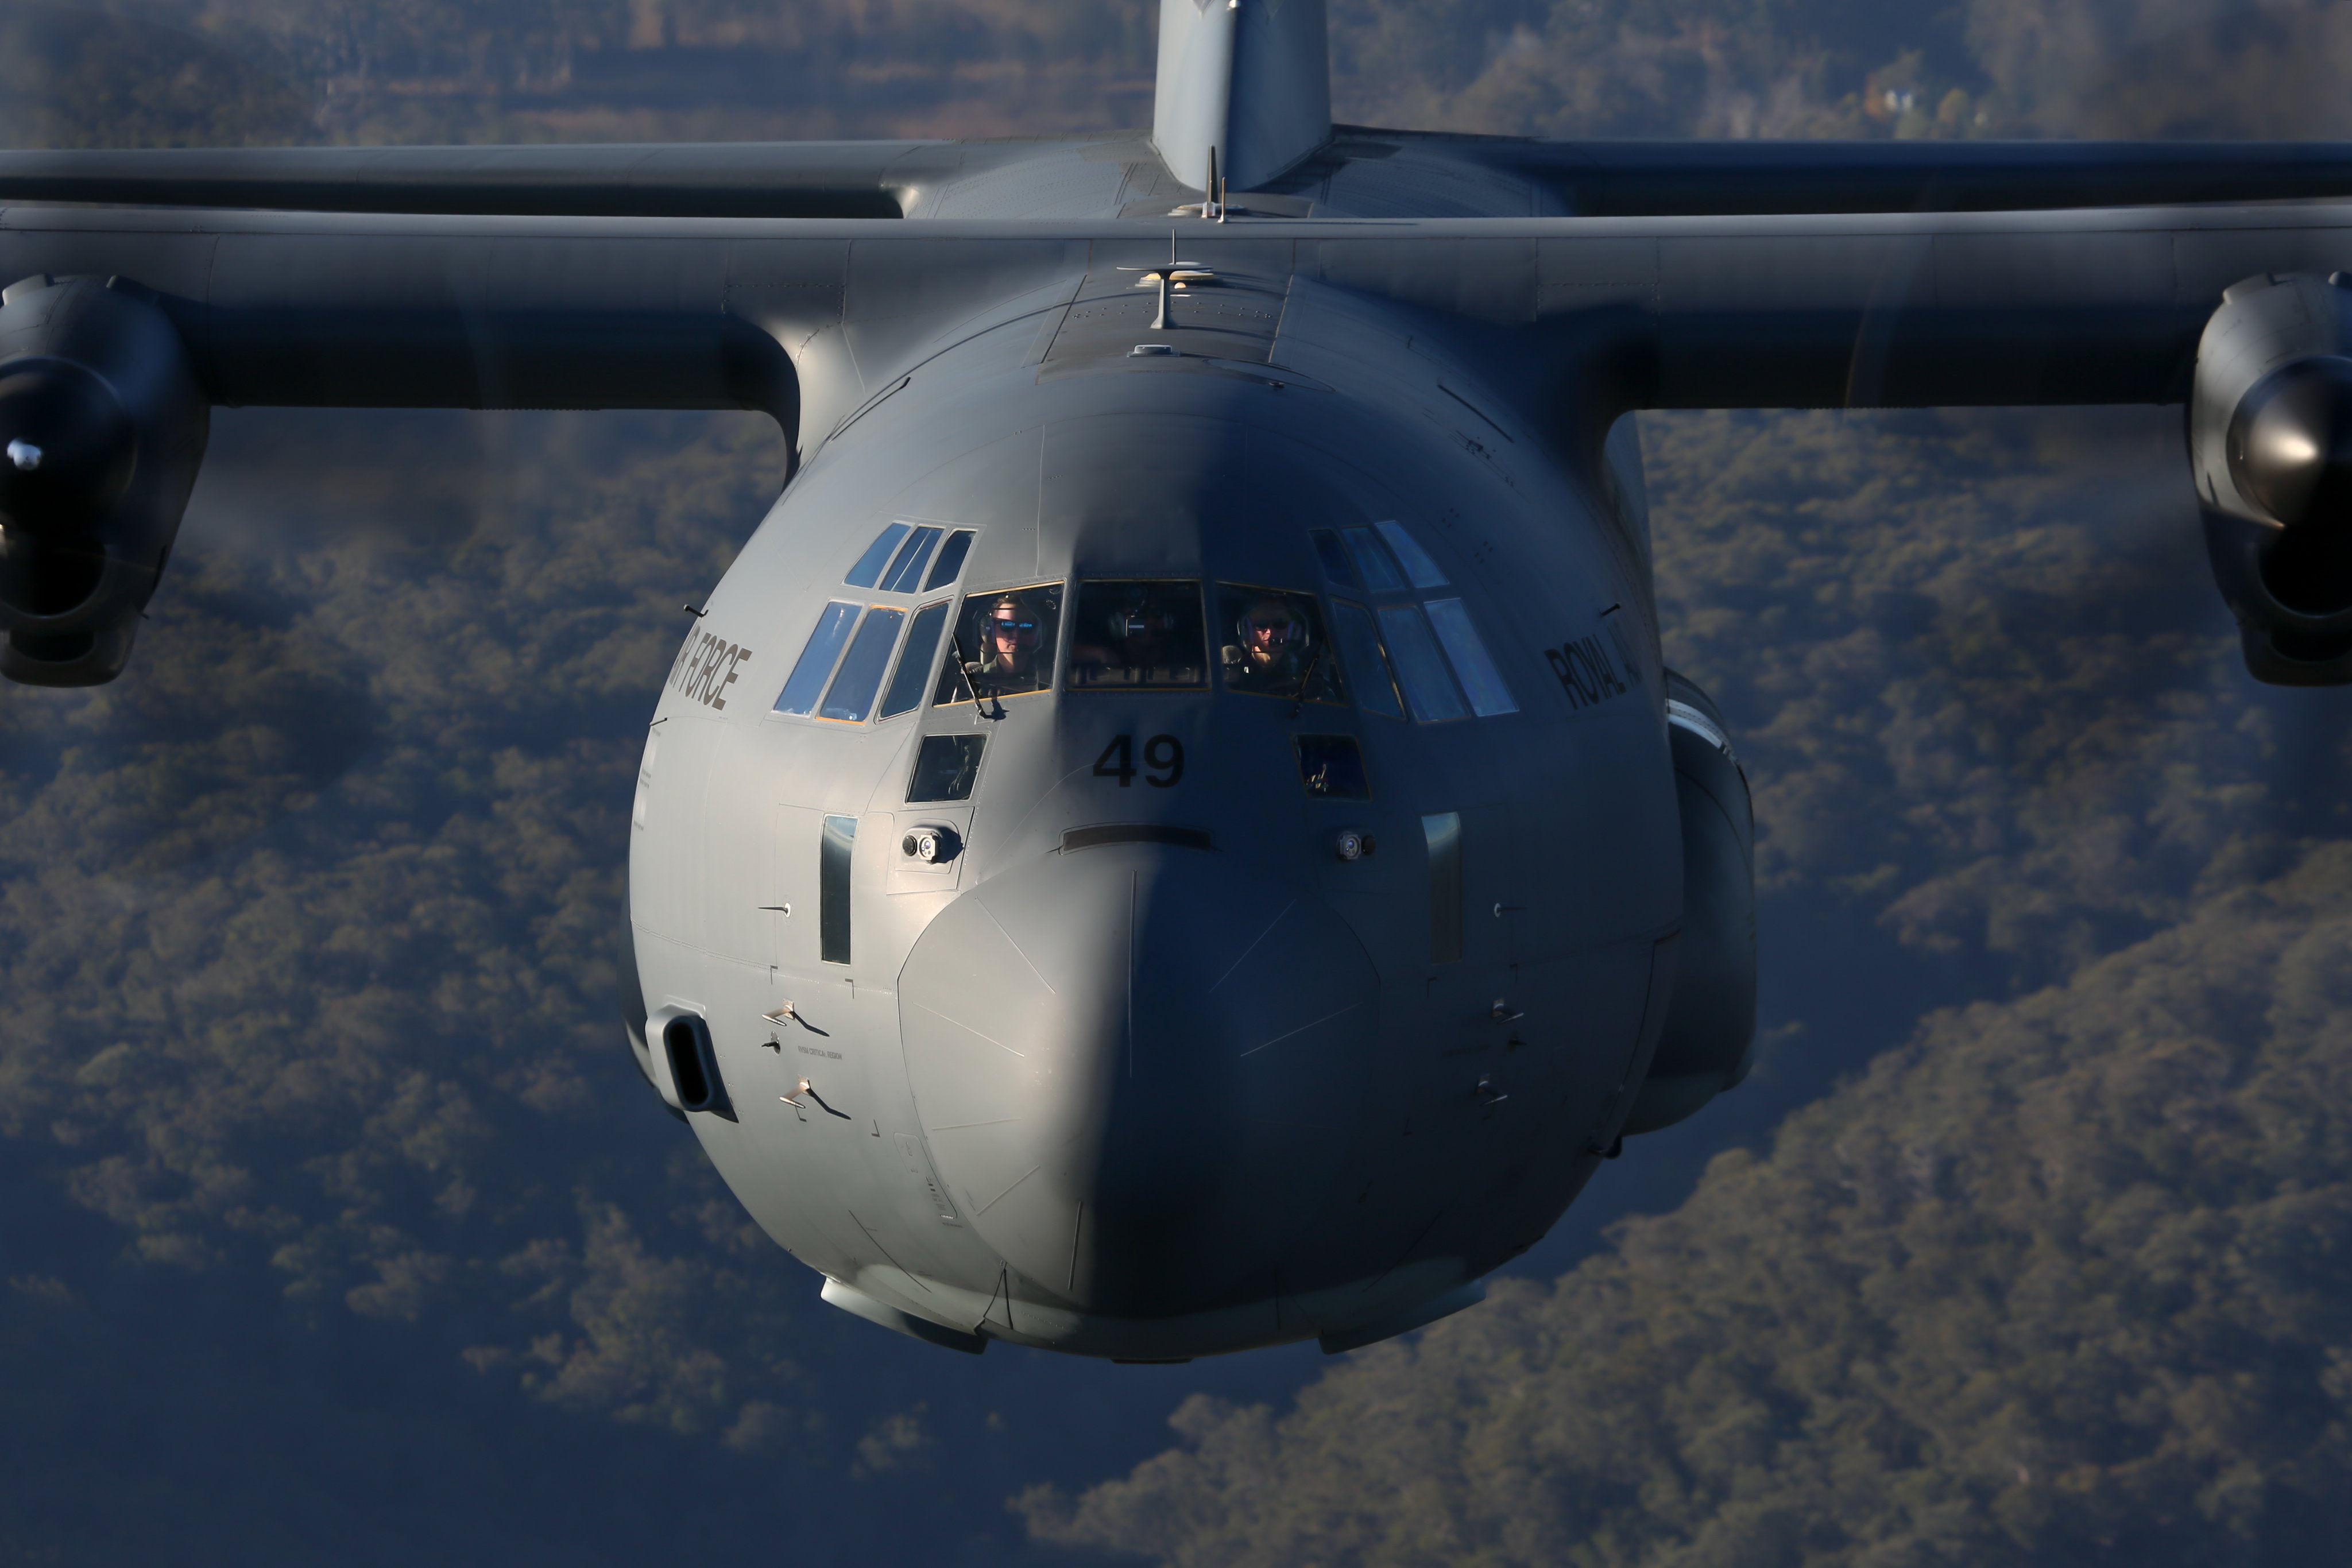 Australian  Government  Announced  Purchase  Of  20  new C-130J Hercules  aircraft  for the Air Force.